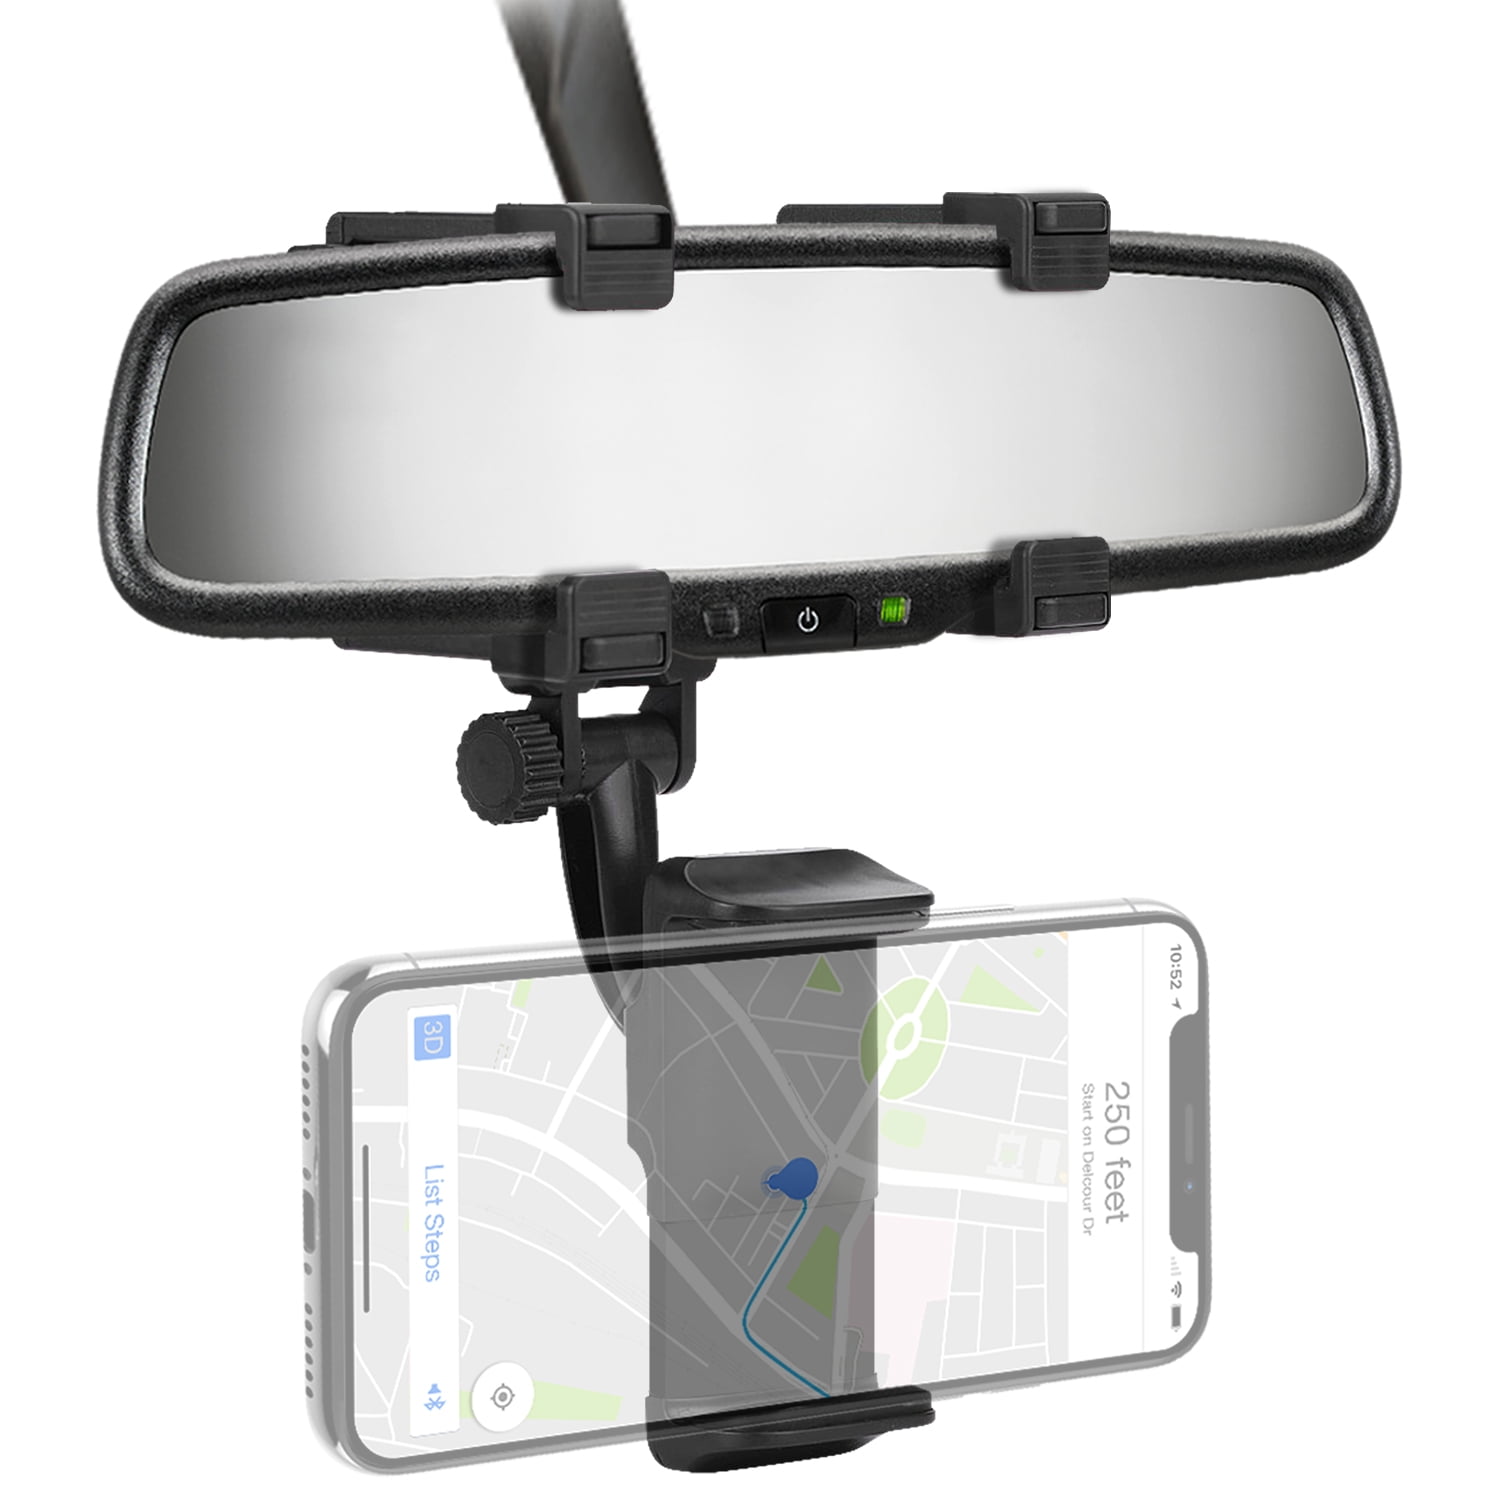 Premier Rearview Mirror Mounted Phone Holder for All Phones, Mobile Devices, rotates 360